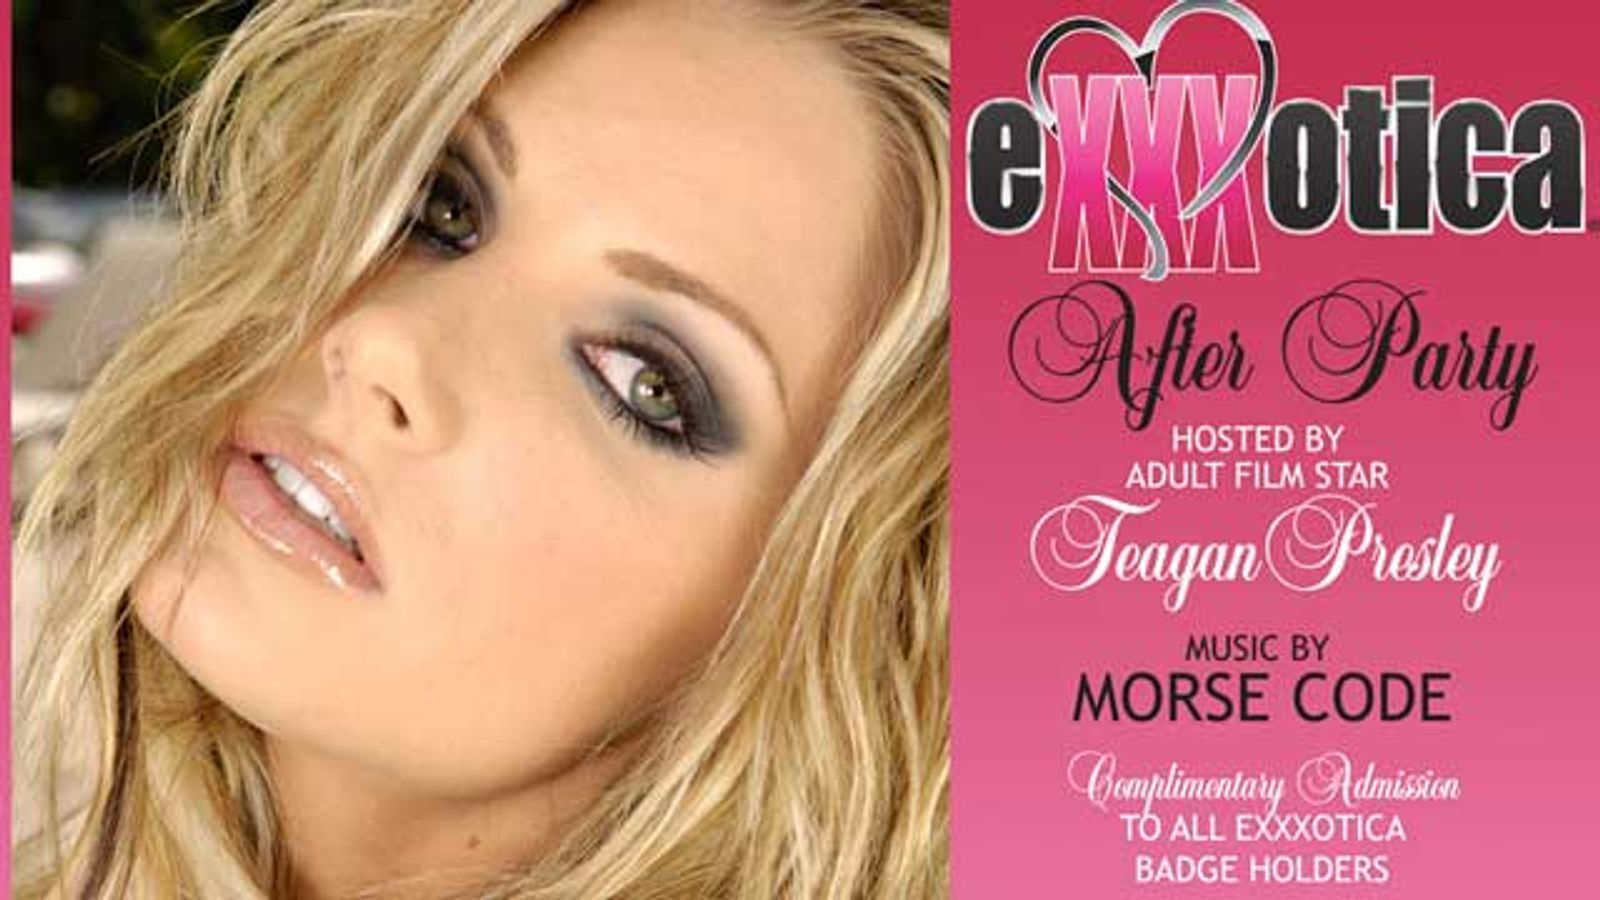 Teagan Presley to Appear at Exxxotica This Weekend